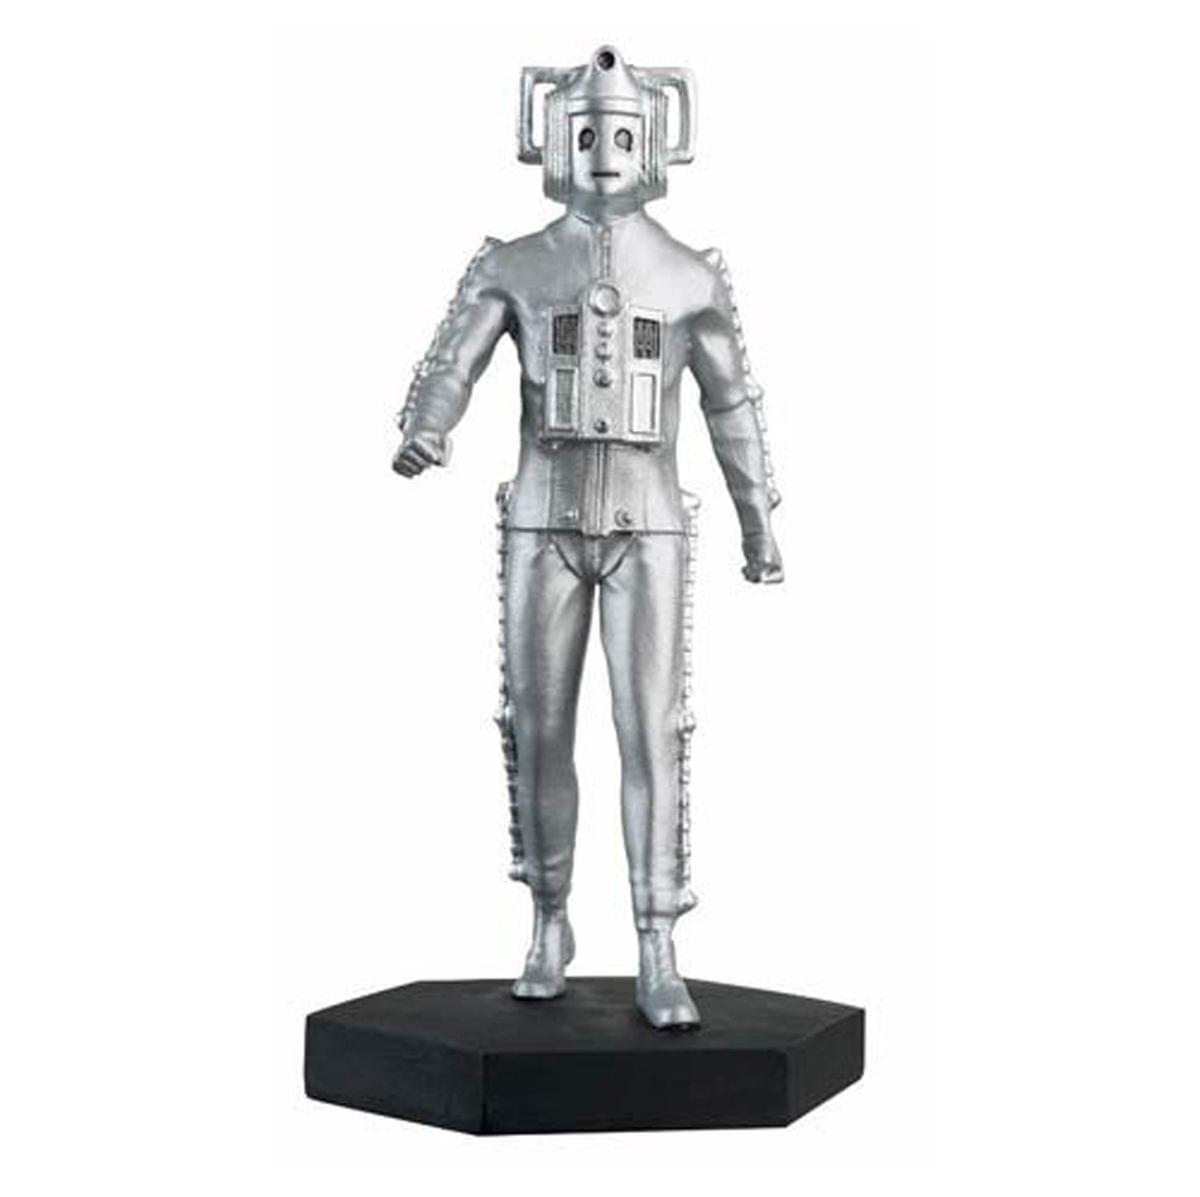 Doctor Who Cyberman "Invasion" 4" Resin Figure